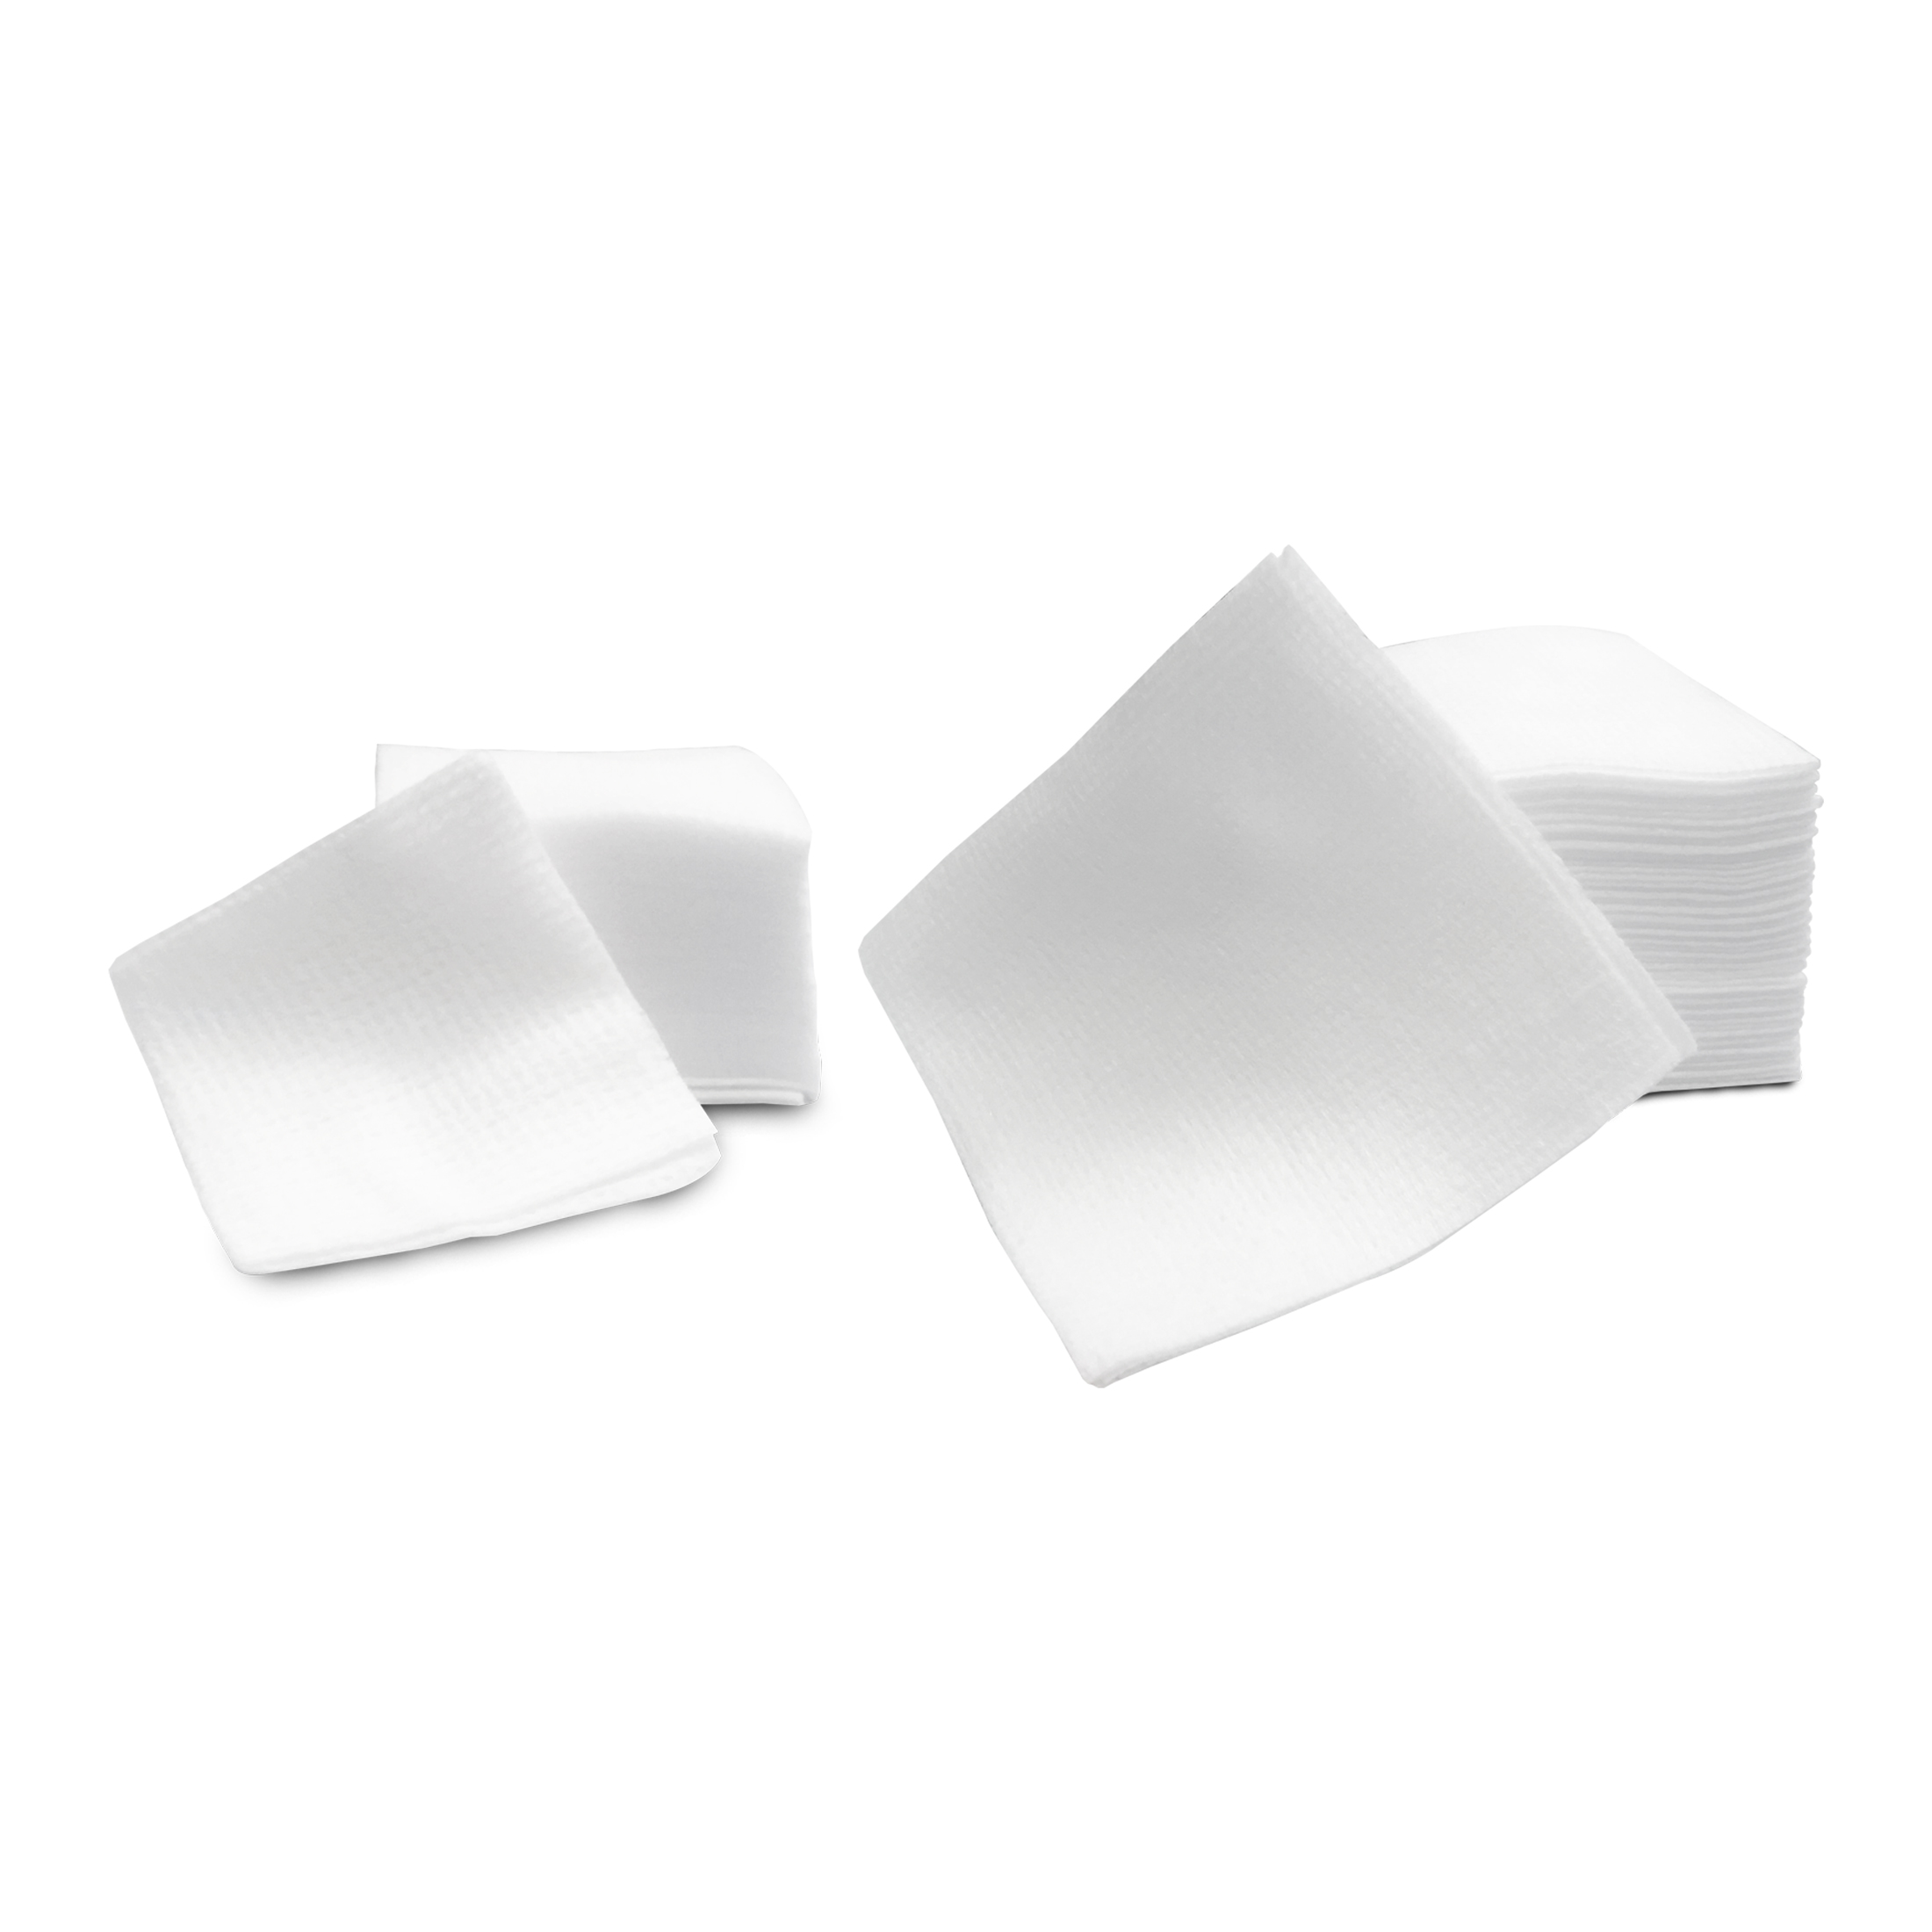 Wipes Products, Supplies and Equipment